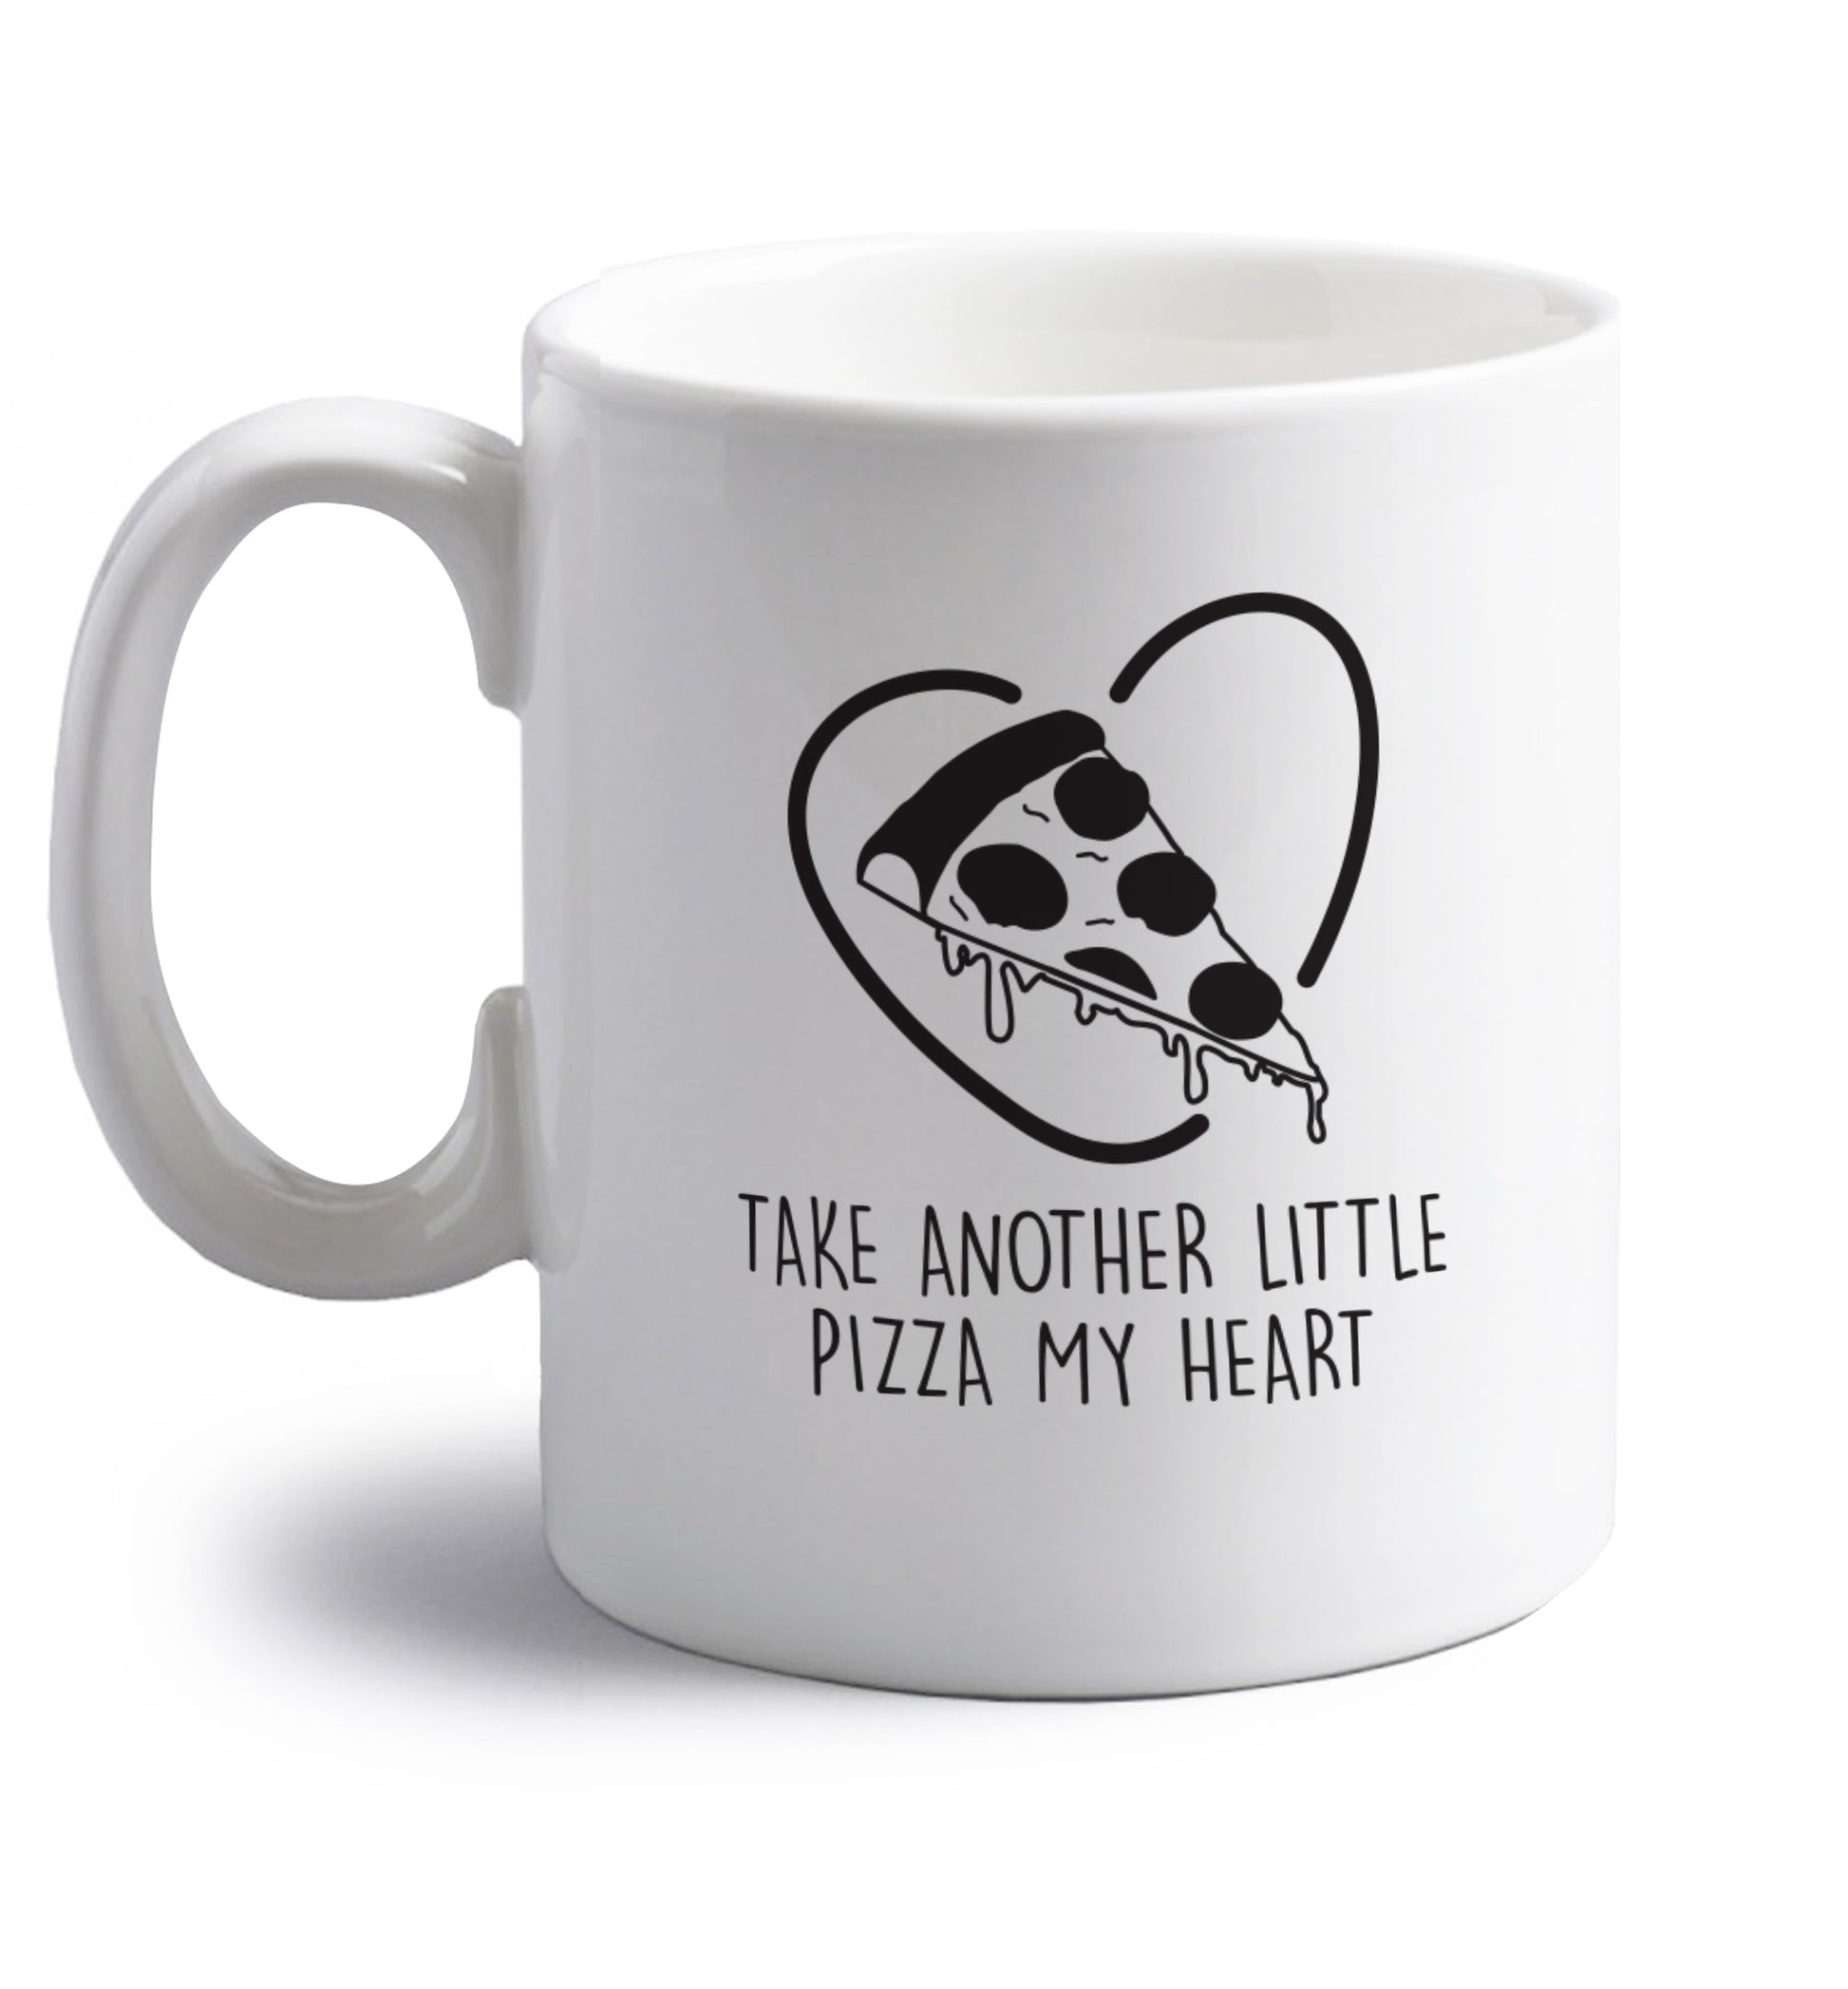 Take another little pizza my heart right handed white ceramic mug 